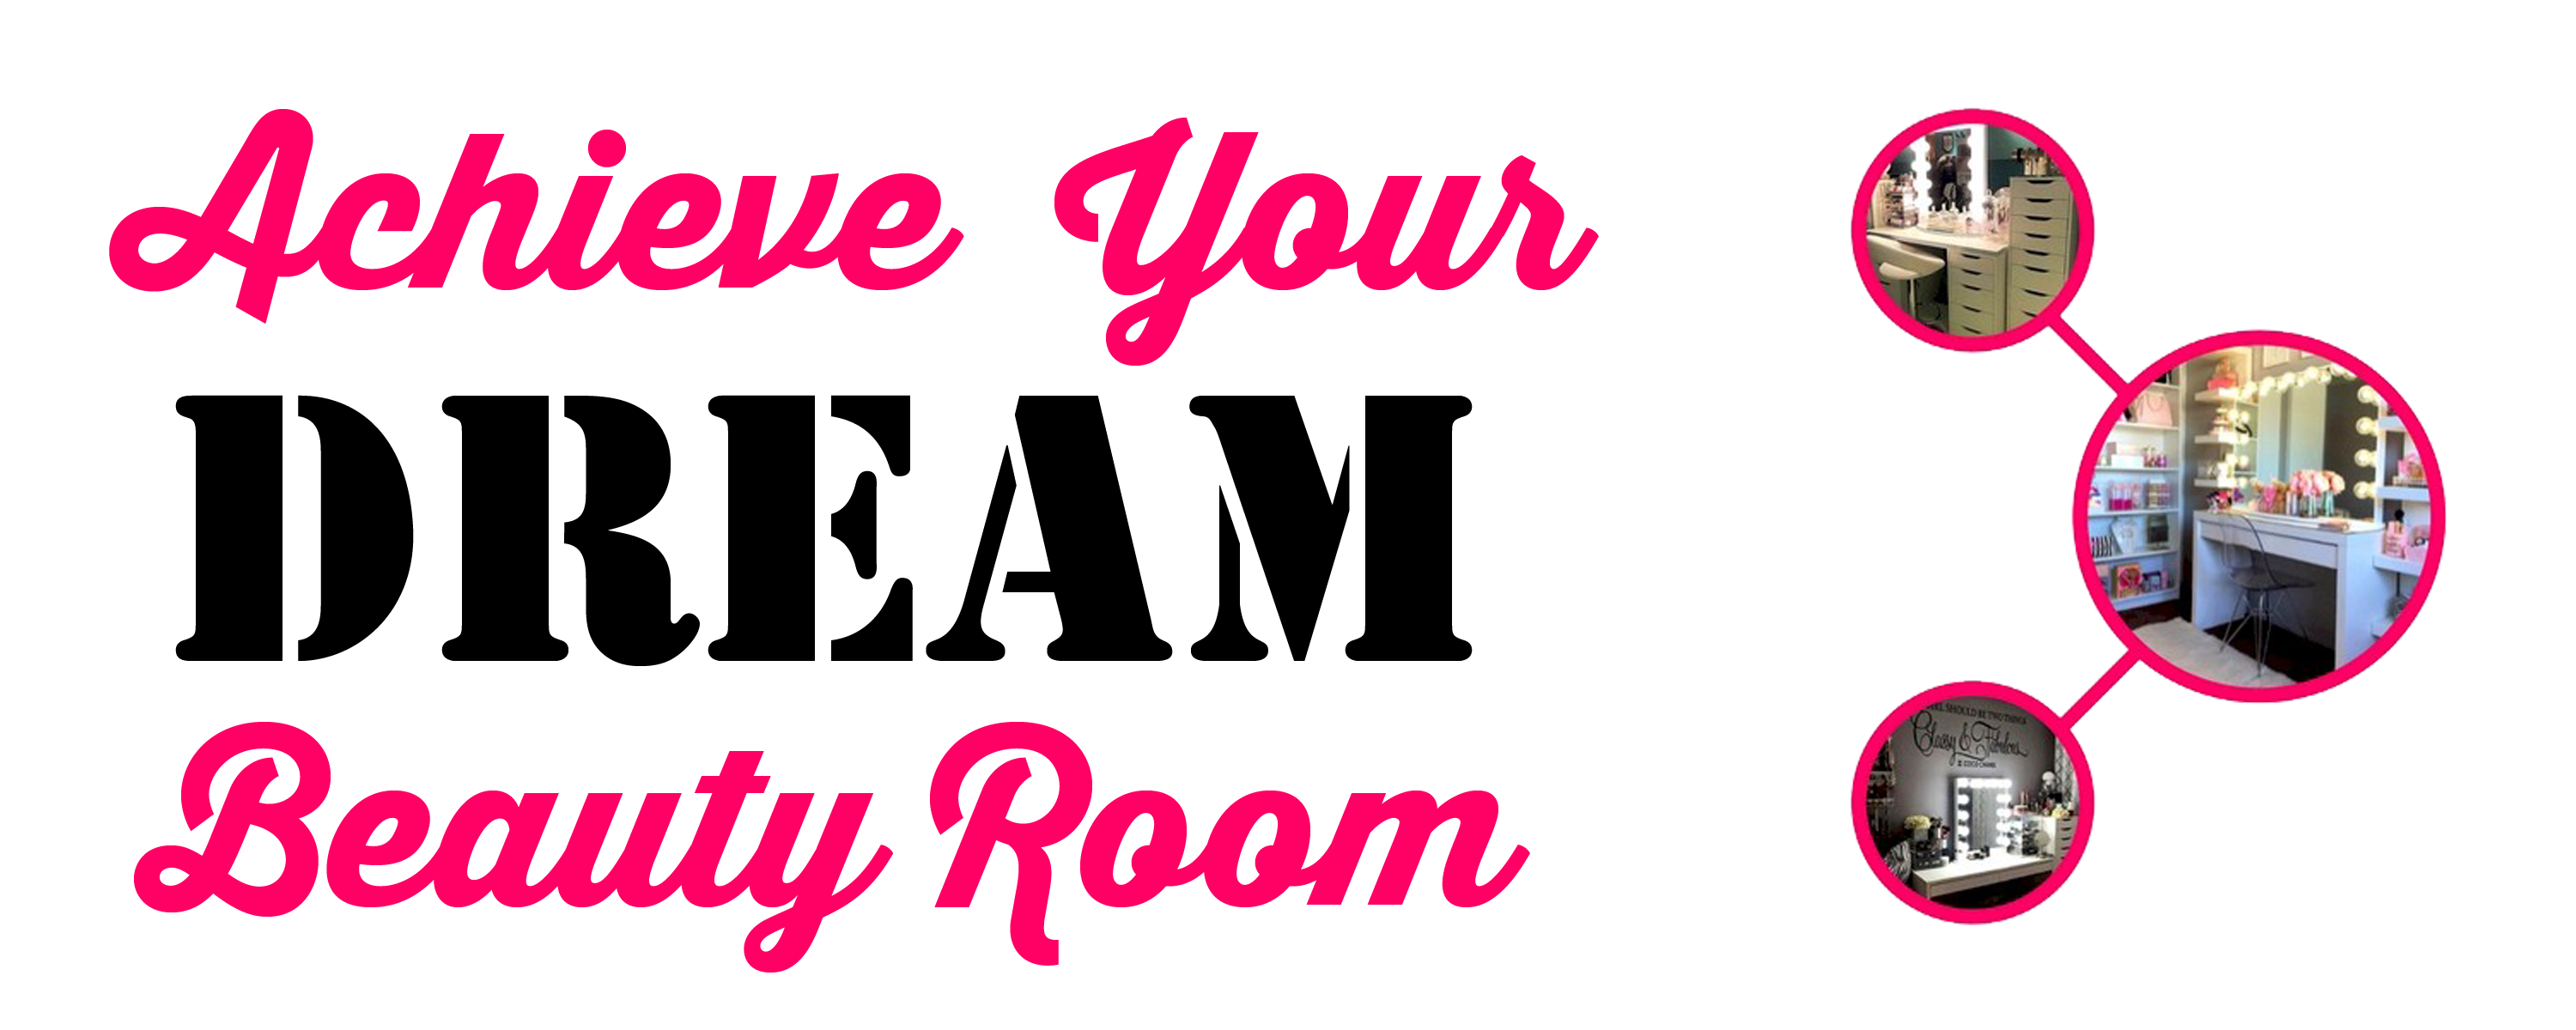 Achieve Your DREAM Beauty Room